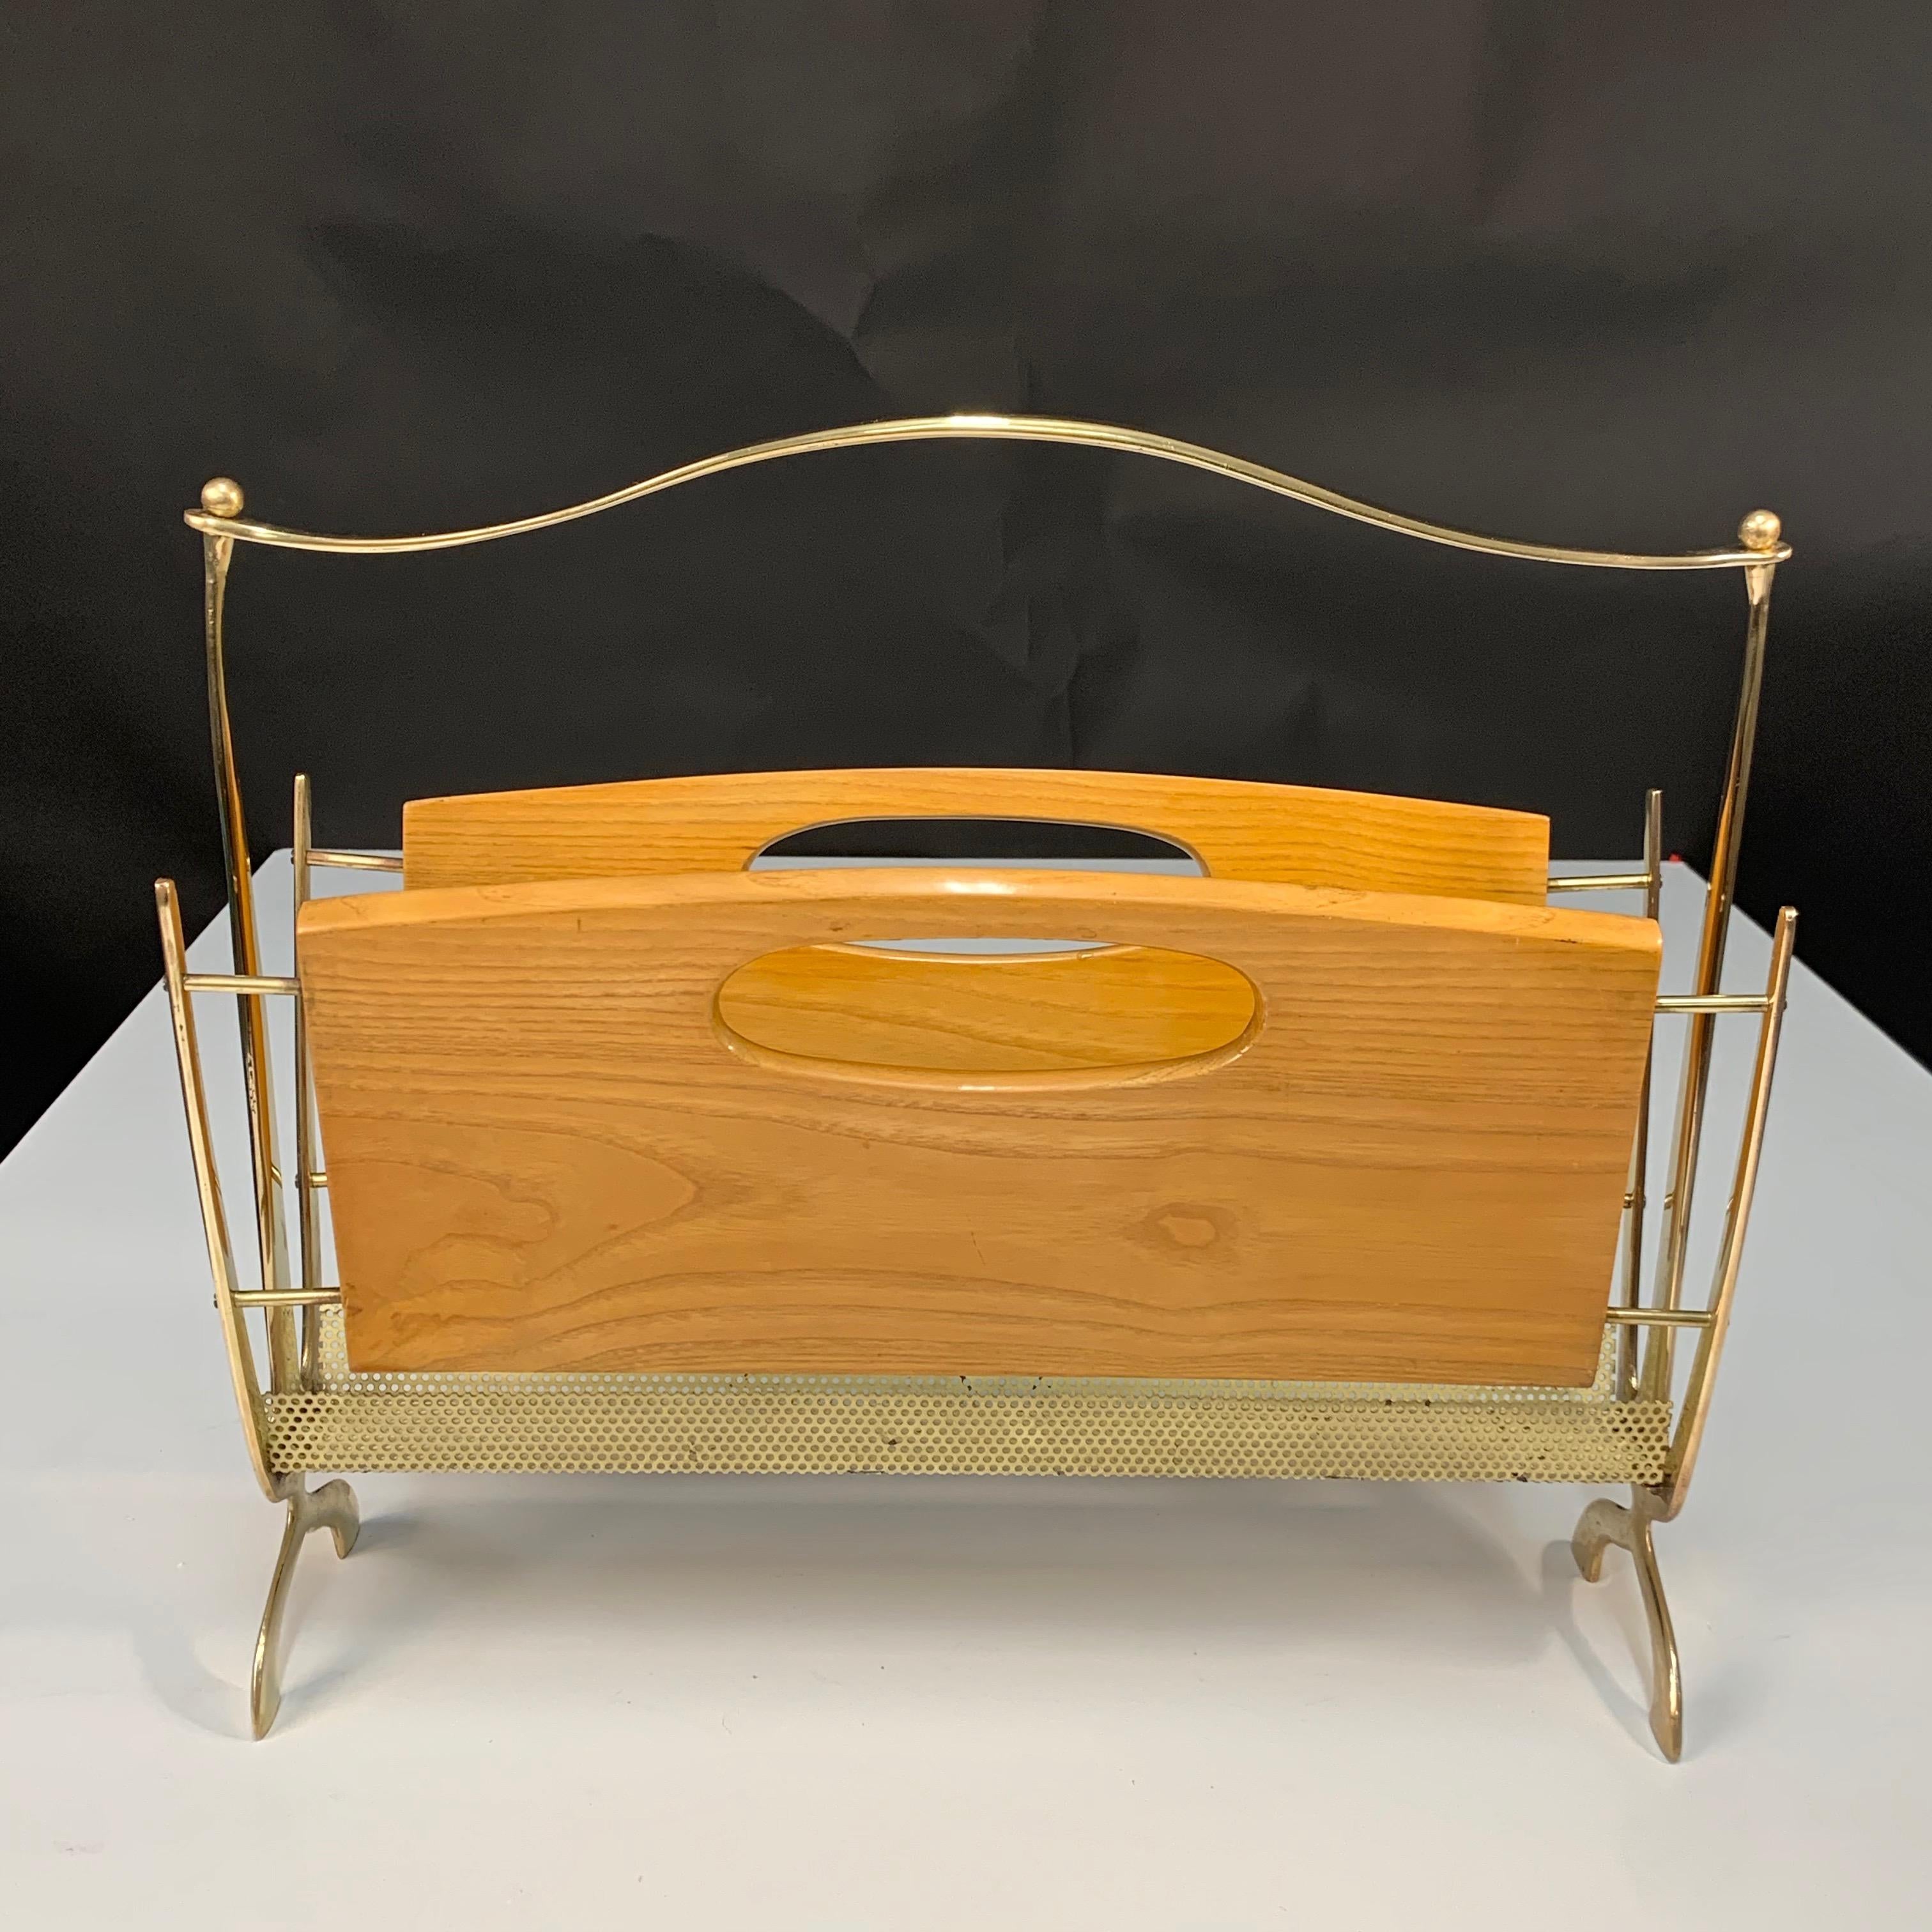 Maison Baguès Midcentury Brass and Chestnut Wood French Magazine Rack, 1950s For Sale 6